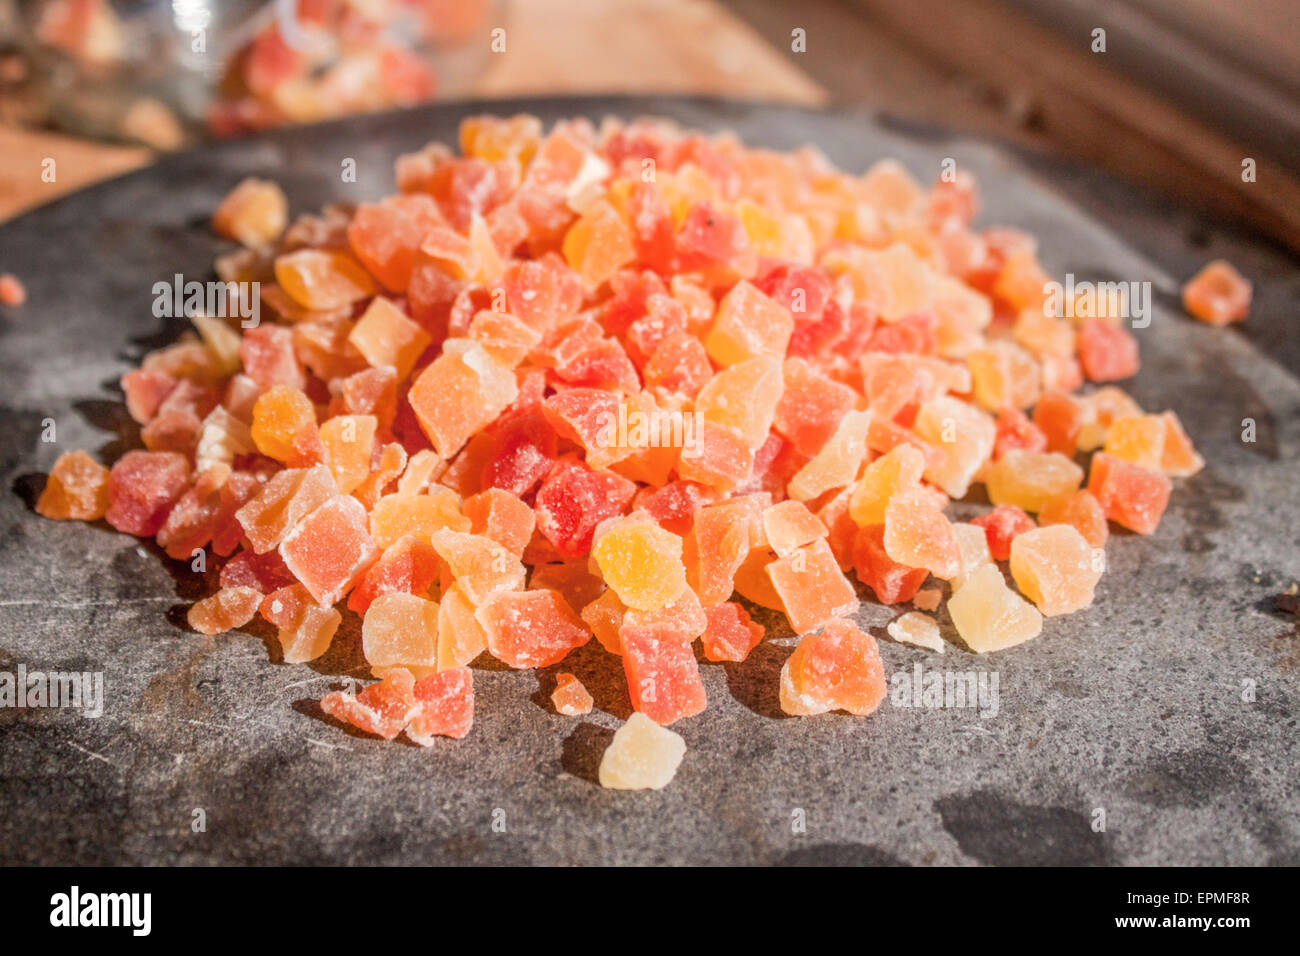 Orange and red dried papayas on a stone plate Stock Photo